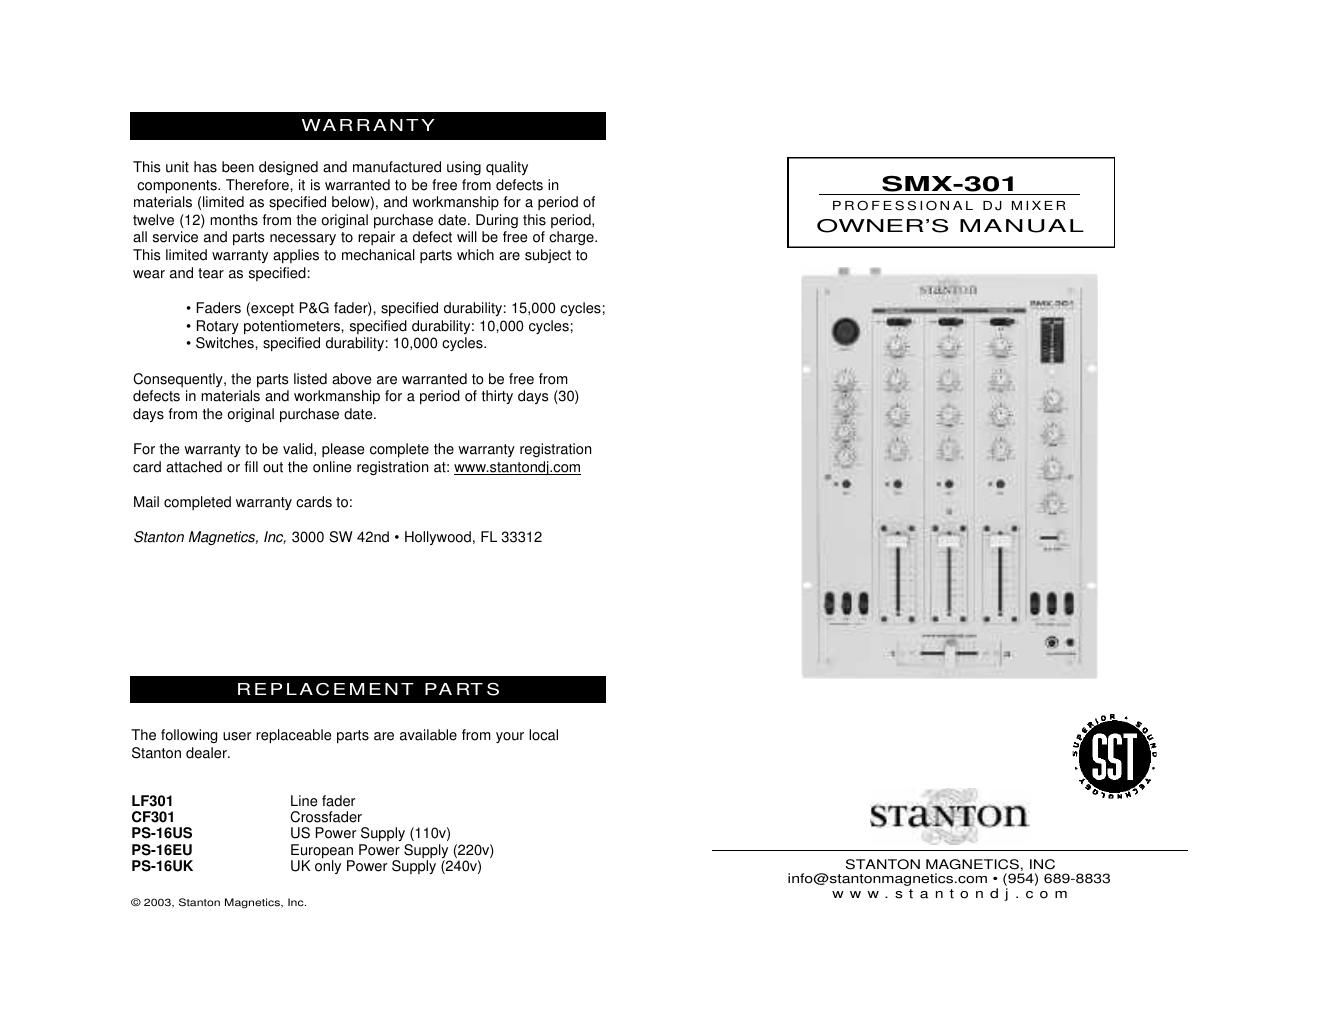 stanton smx 301 owners manual